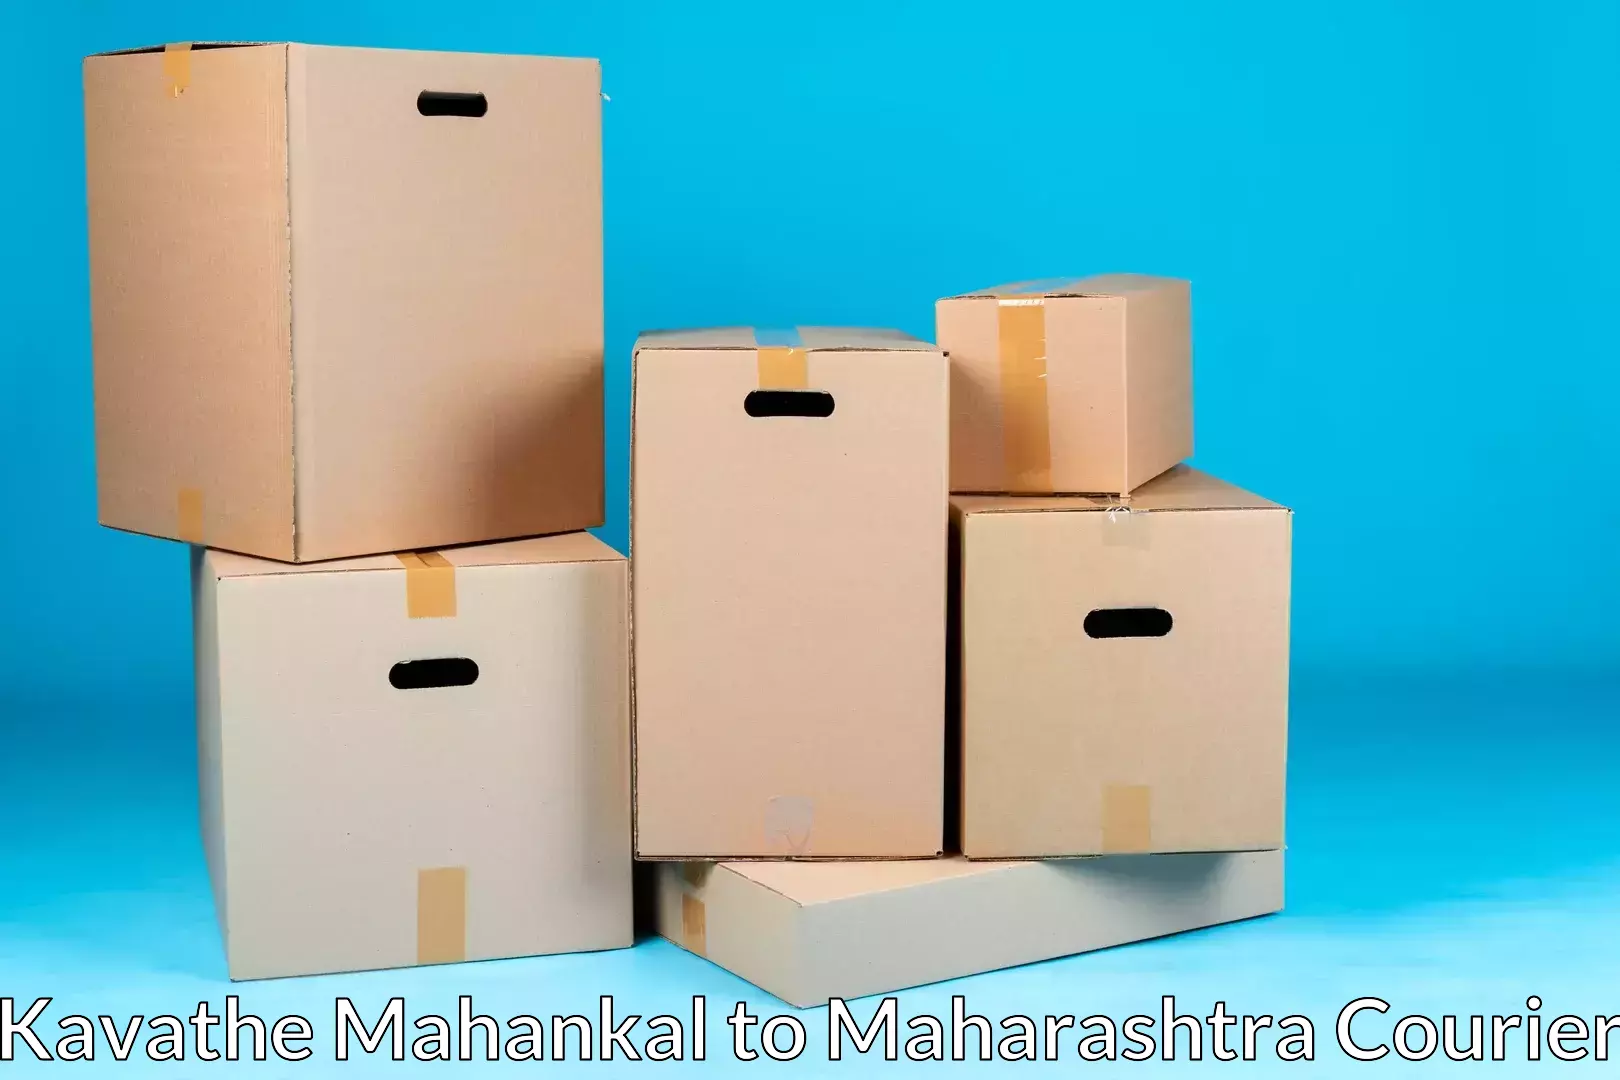 Professional packing services Kavathe Mahankal to Raver